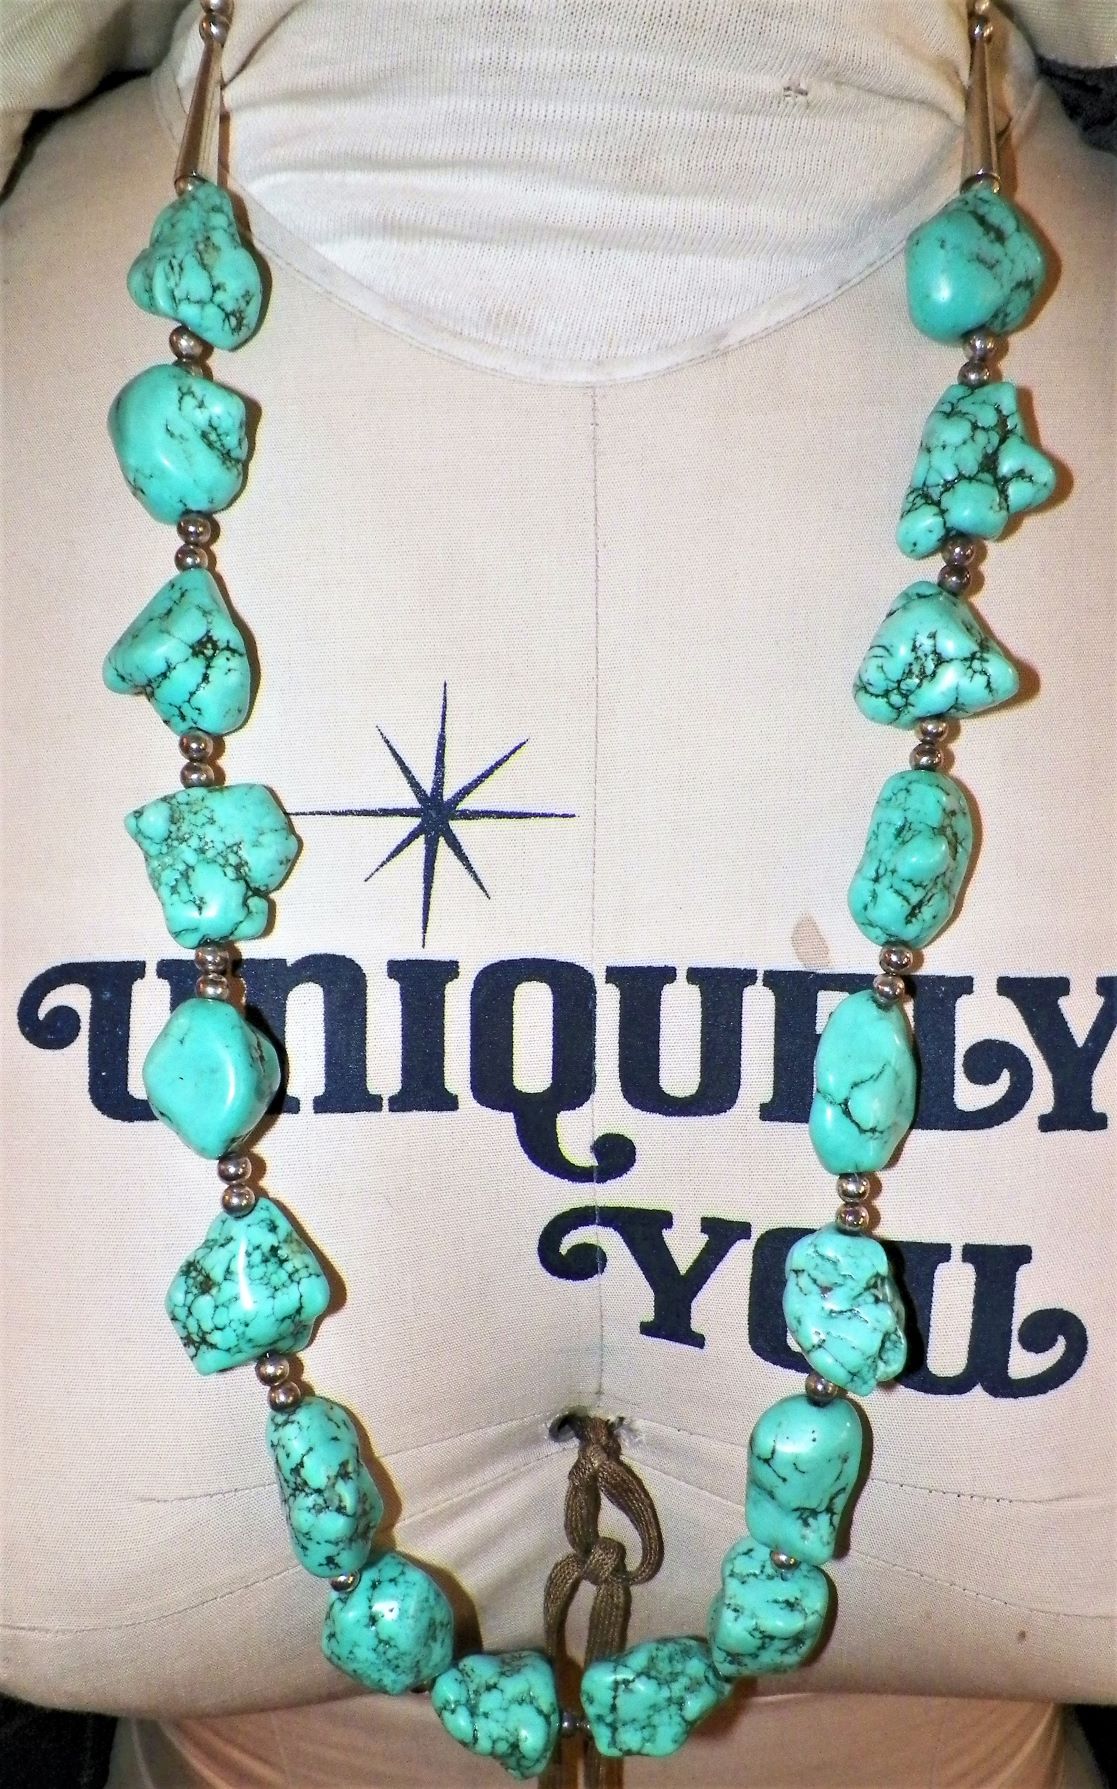 JEWELRY NECKLACE TURQUOISE CHUNKY 1AA.JPG